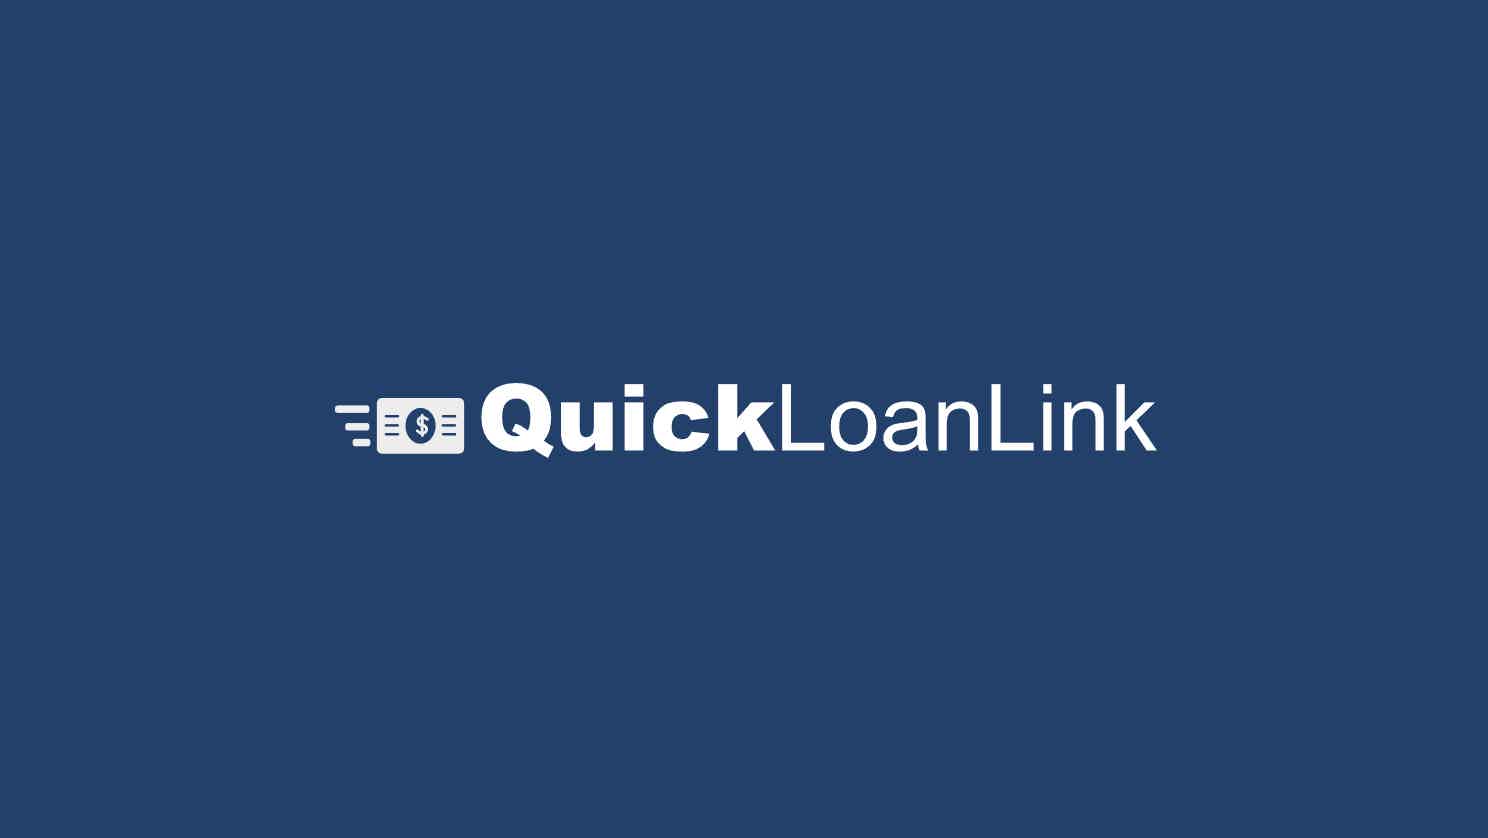 Learn more about this service. Source: Quick Loan Link.